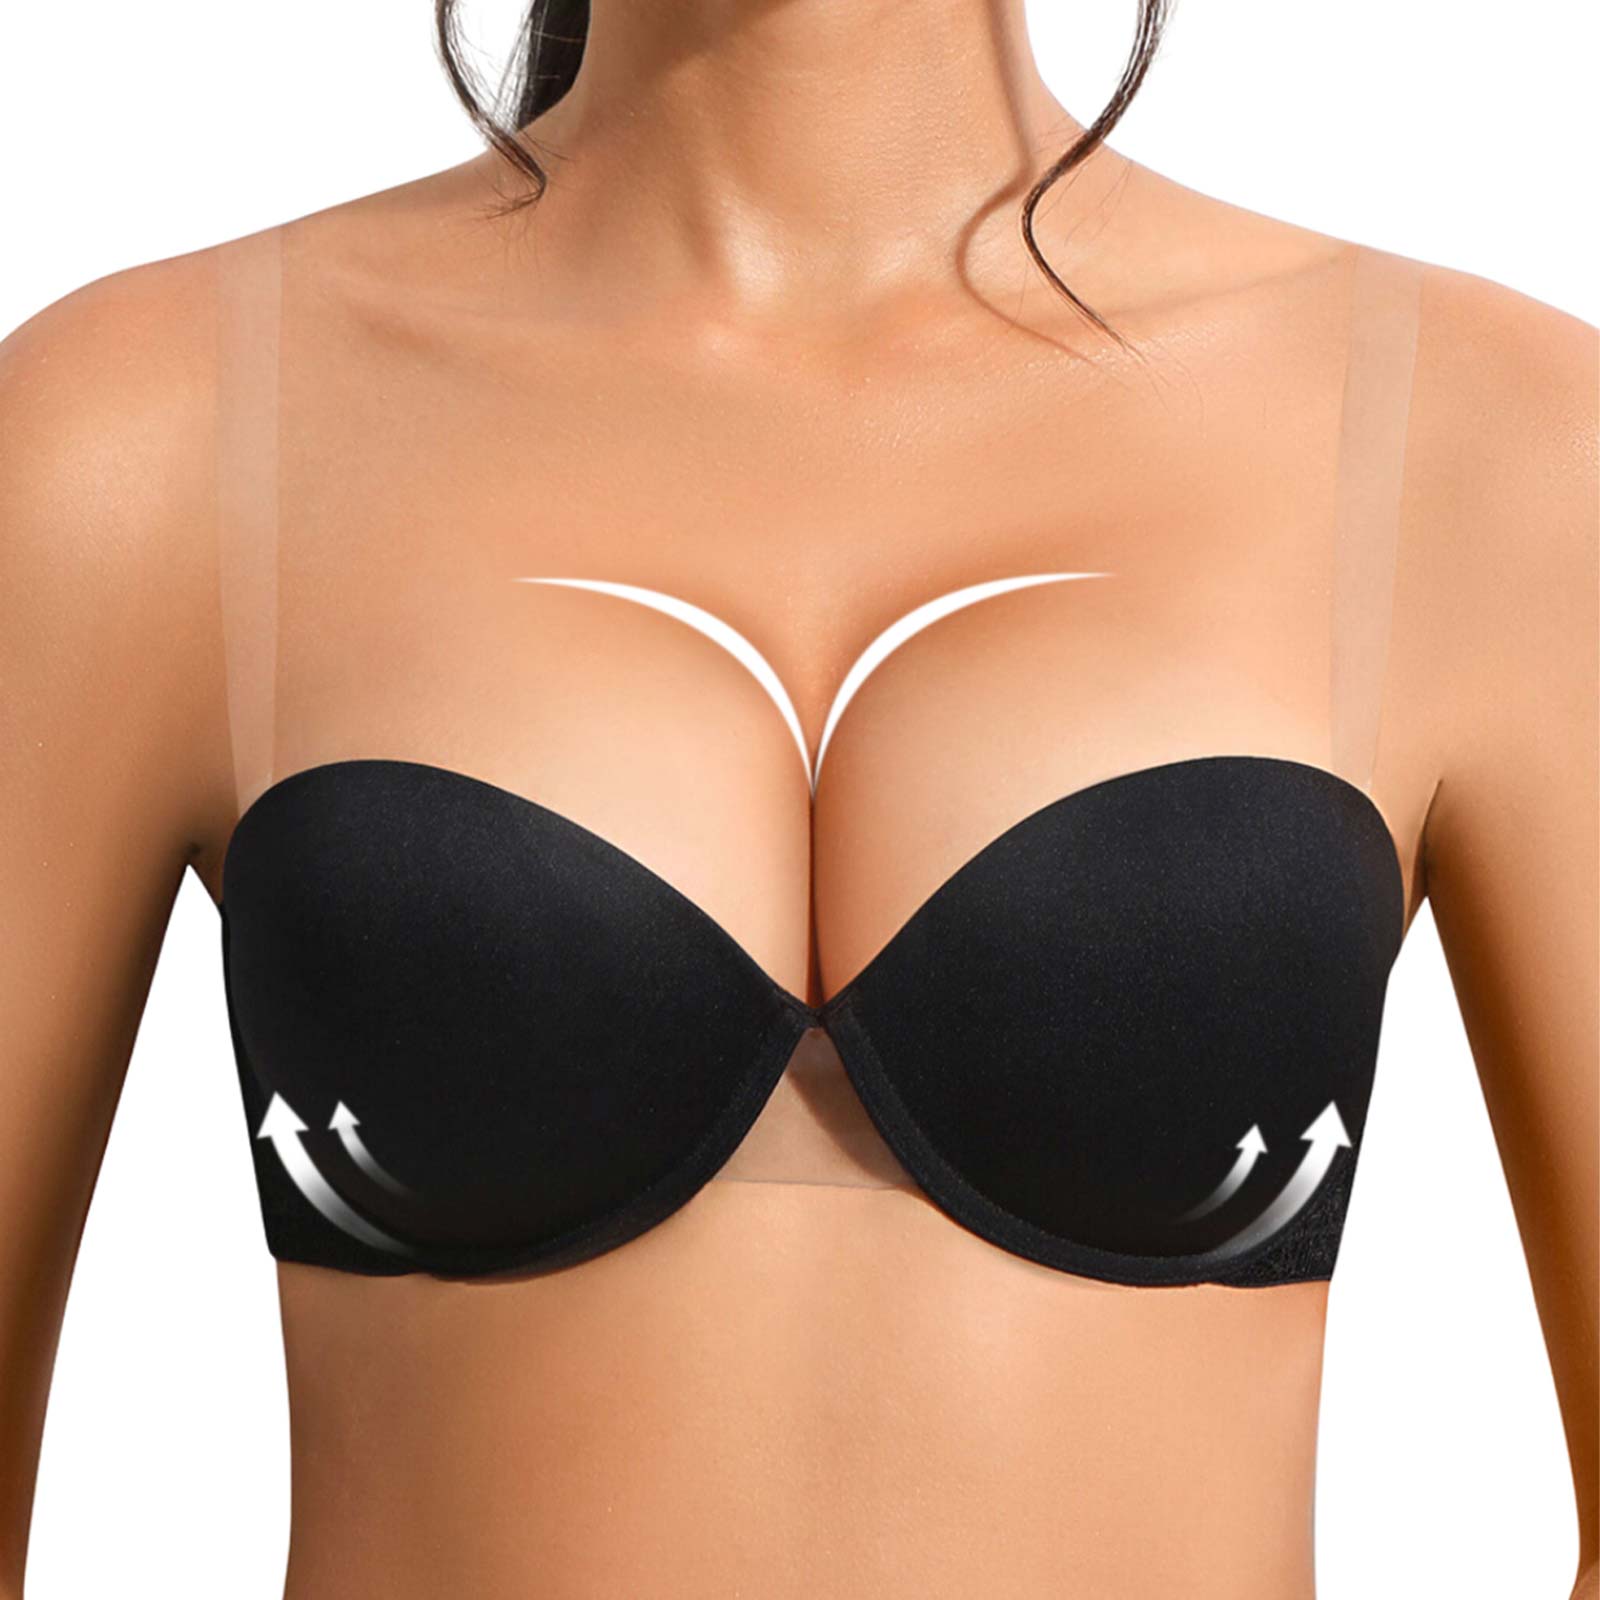 YBCG Women's Strapless Push up Padded Convertible Multiway